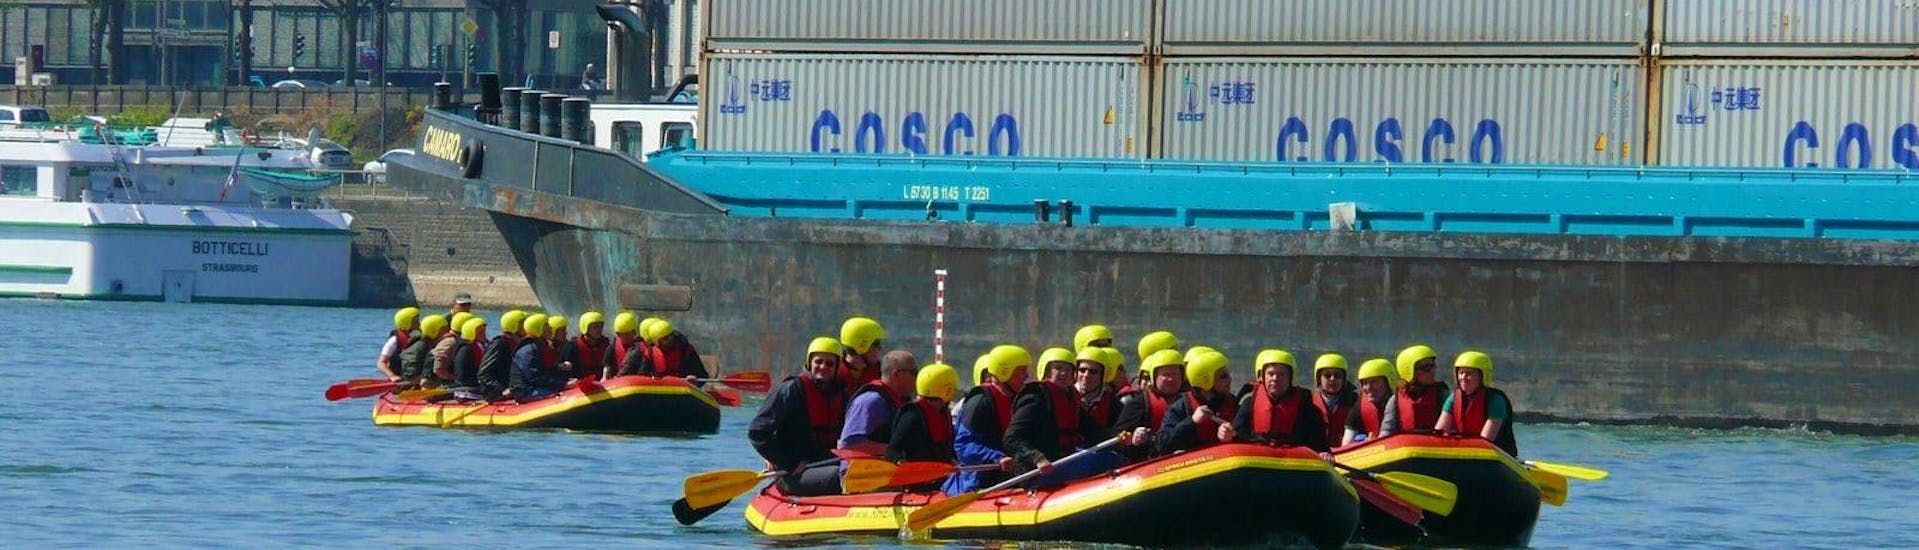 soft-rafting-on-the-rhine-in-colonia-for-groups-wupperkanu-hero